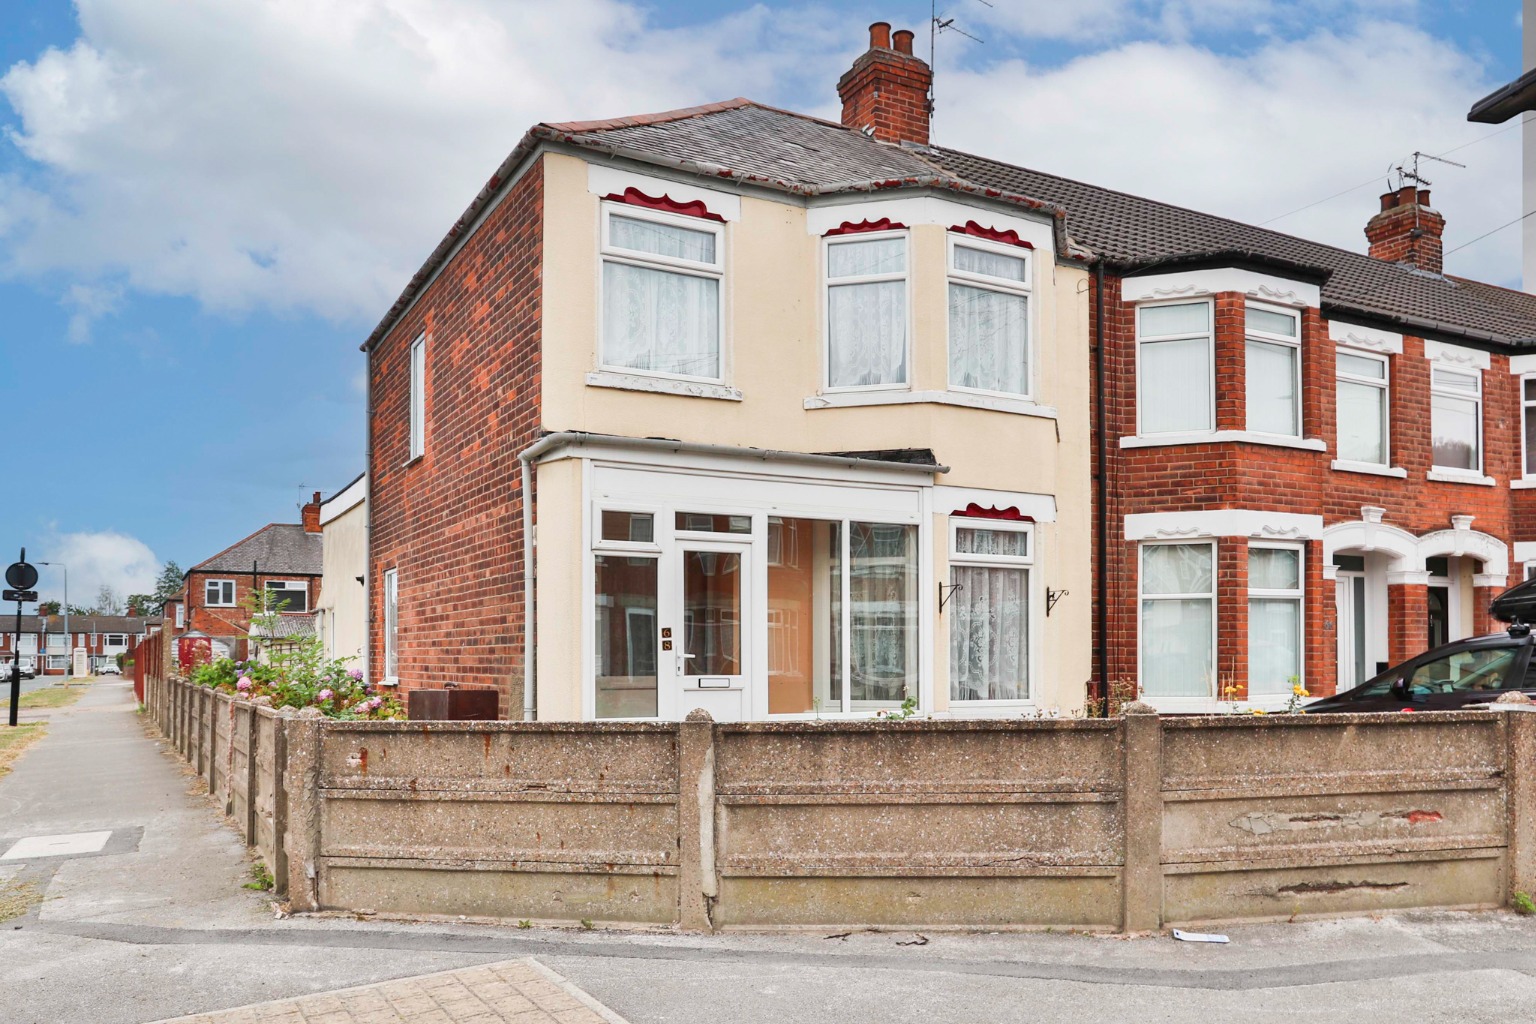 3 bed end of terrace house for sale - Property Image 1